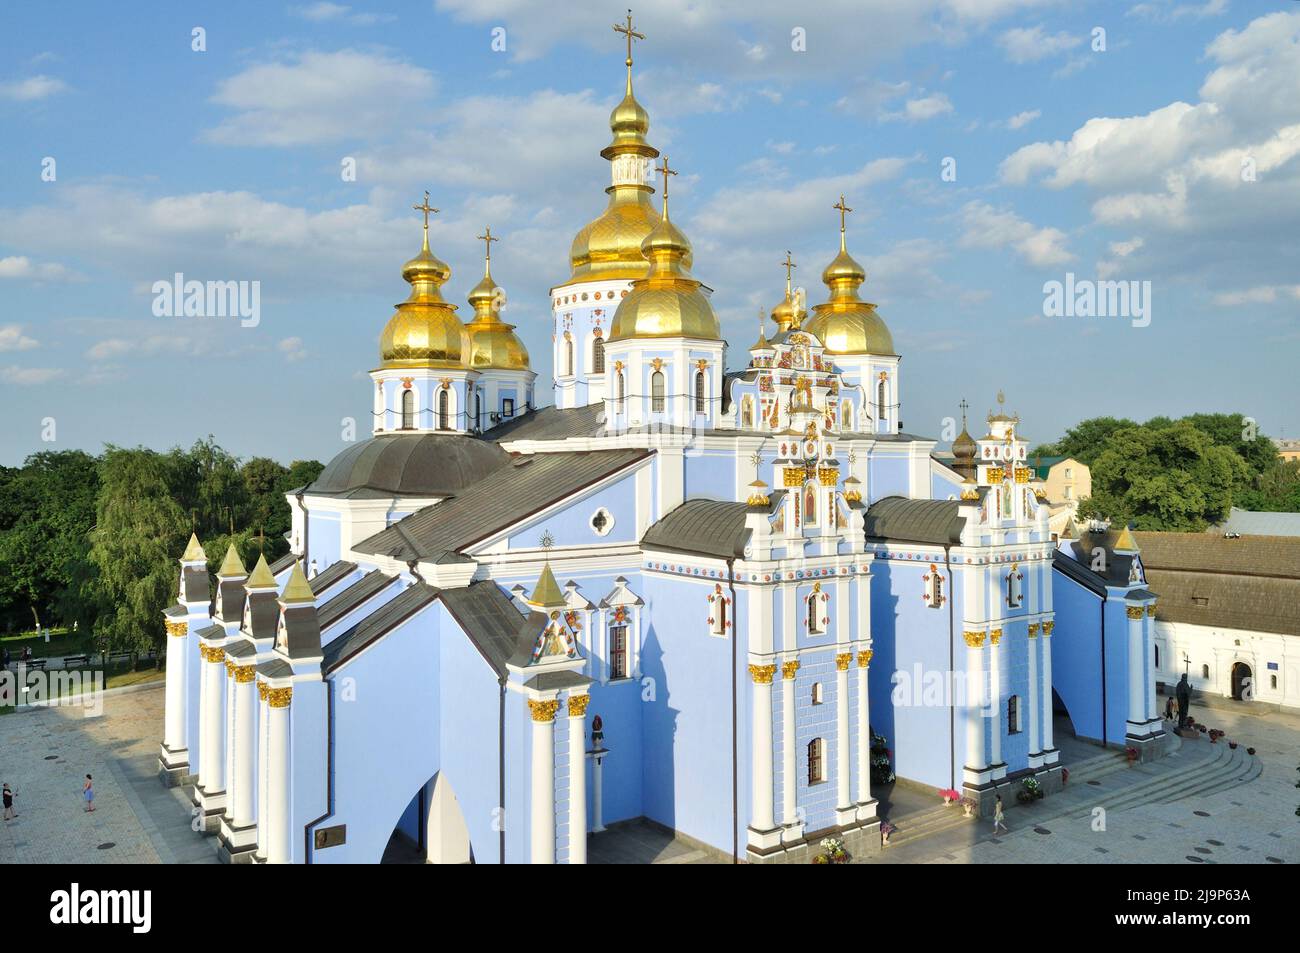 St. Michael's Golden-Domed Monastery. The original cathedral was demolished by the Soviet authorities in the 1930s, but was reconstructed in 1999 Stock Photo